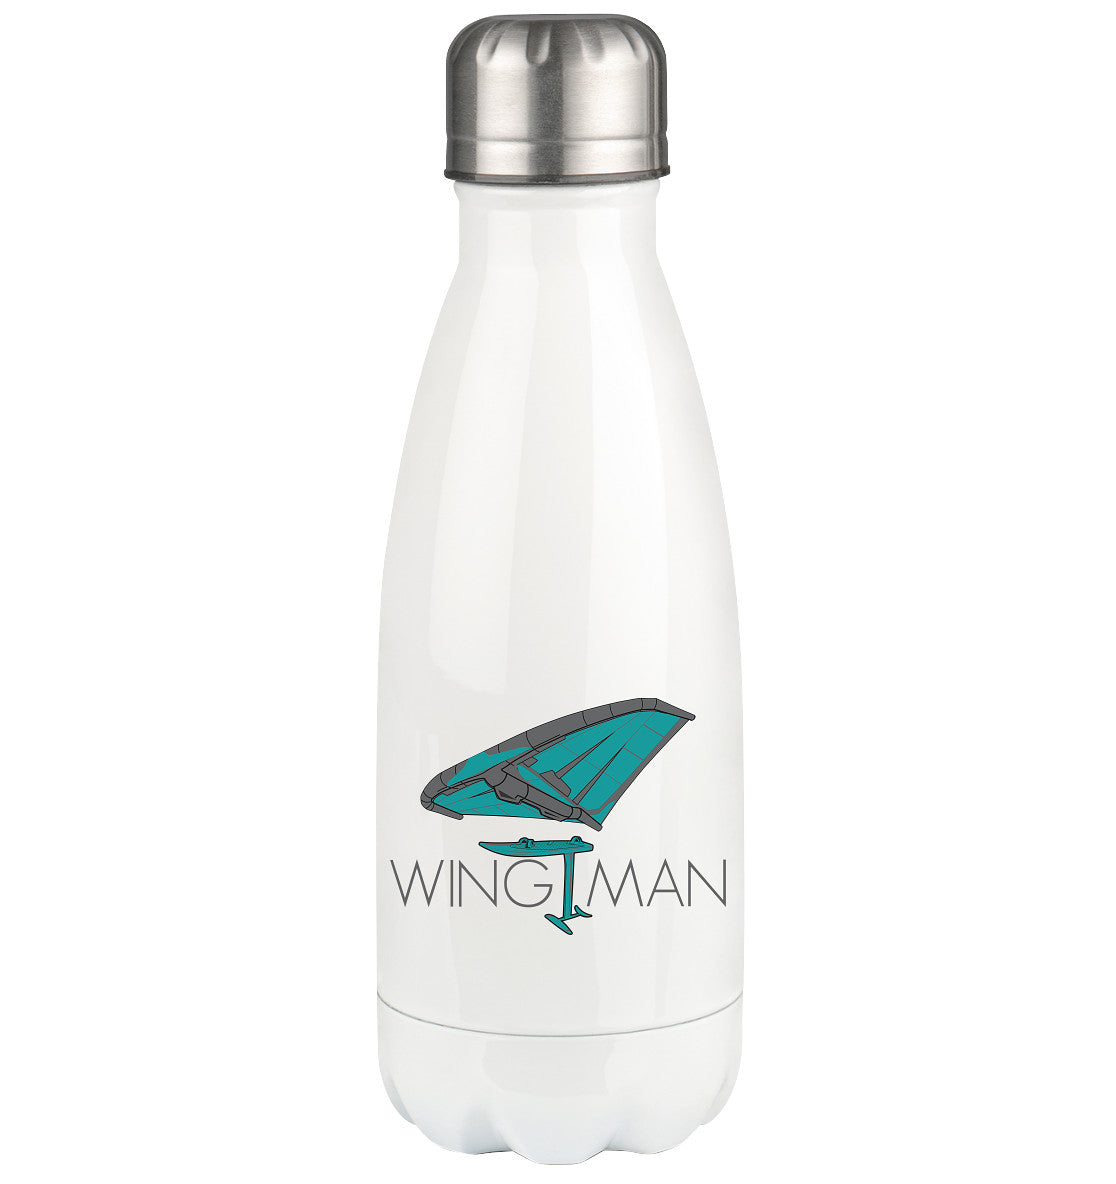 Wingfoiling-WINGMAN - Thermoflasche 350ml